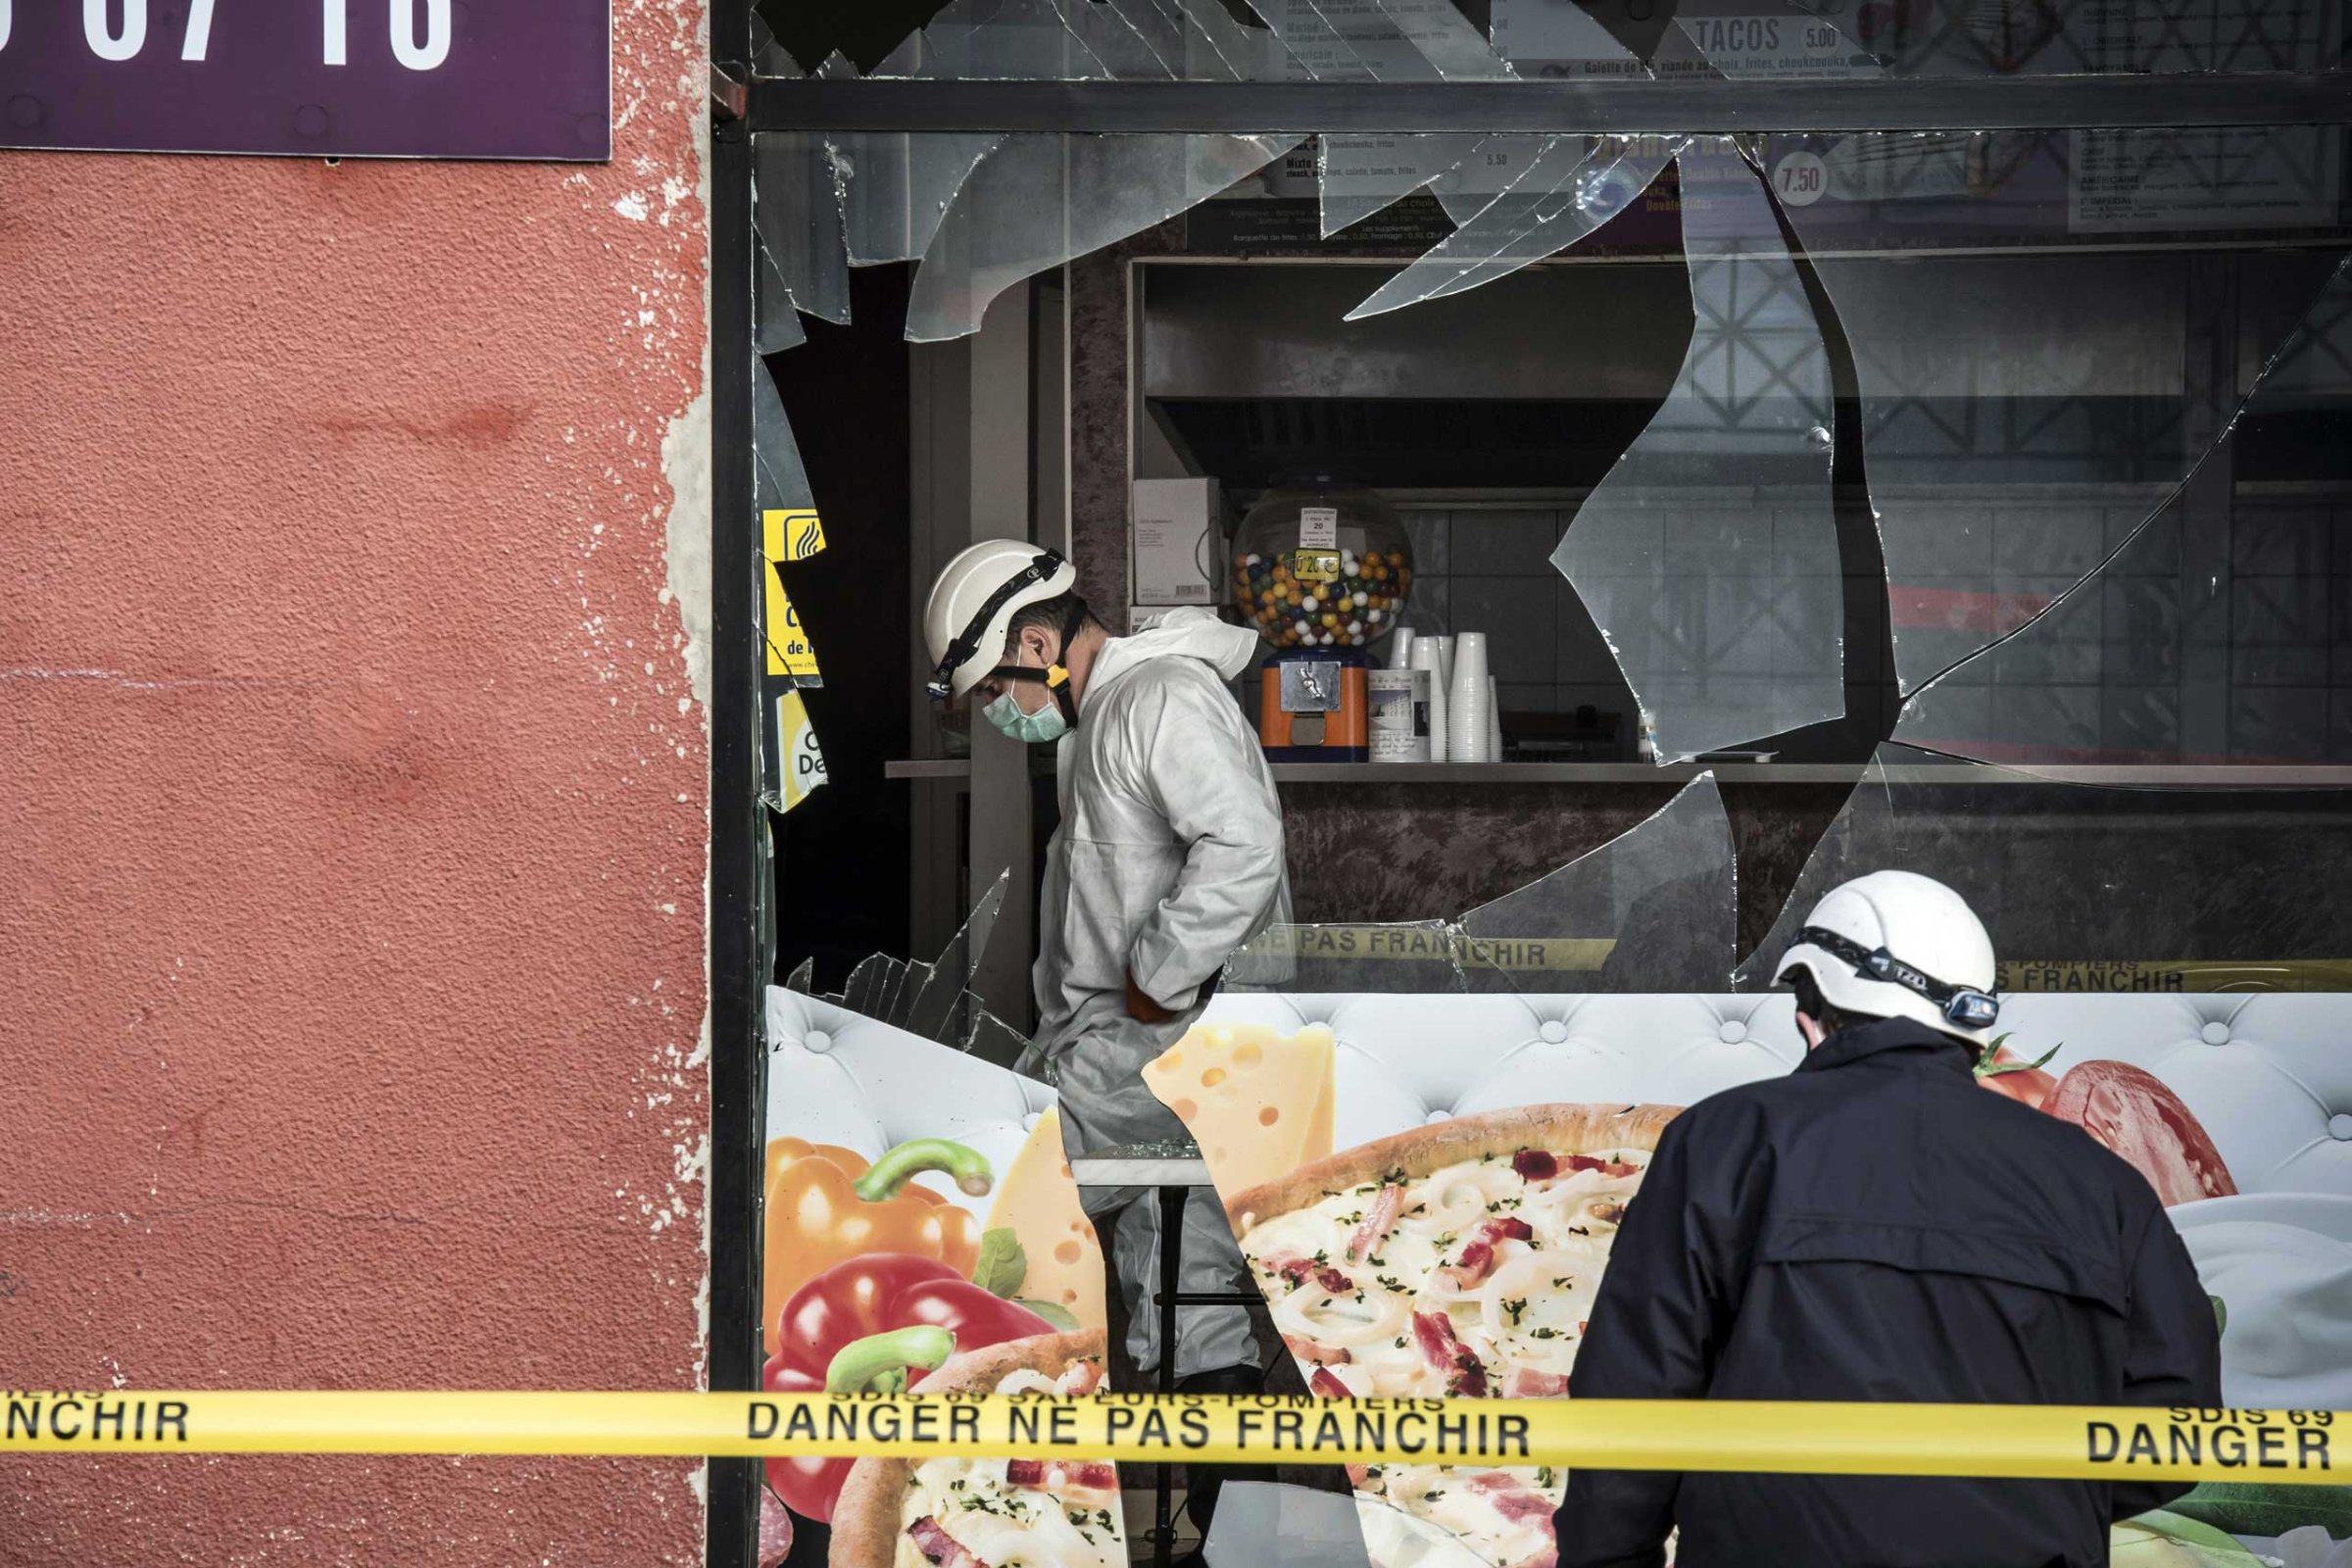 French police forensic scour the scene of an explosion at a kebab shop damaged following an explosion near a mosque, on Jan. 8, 2015, in Villefranche-sur-Saone, eastern France.